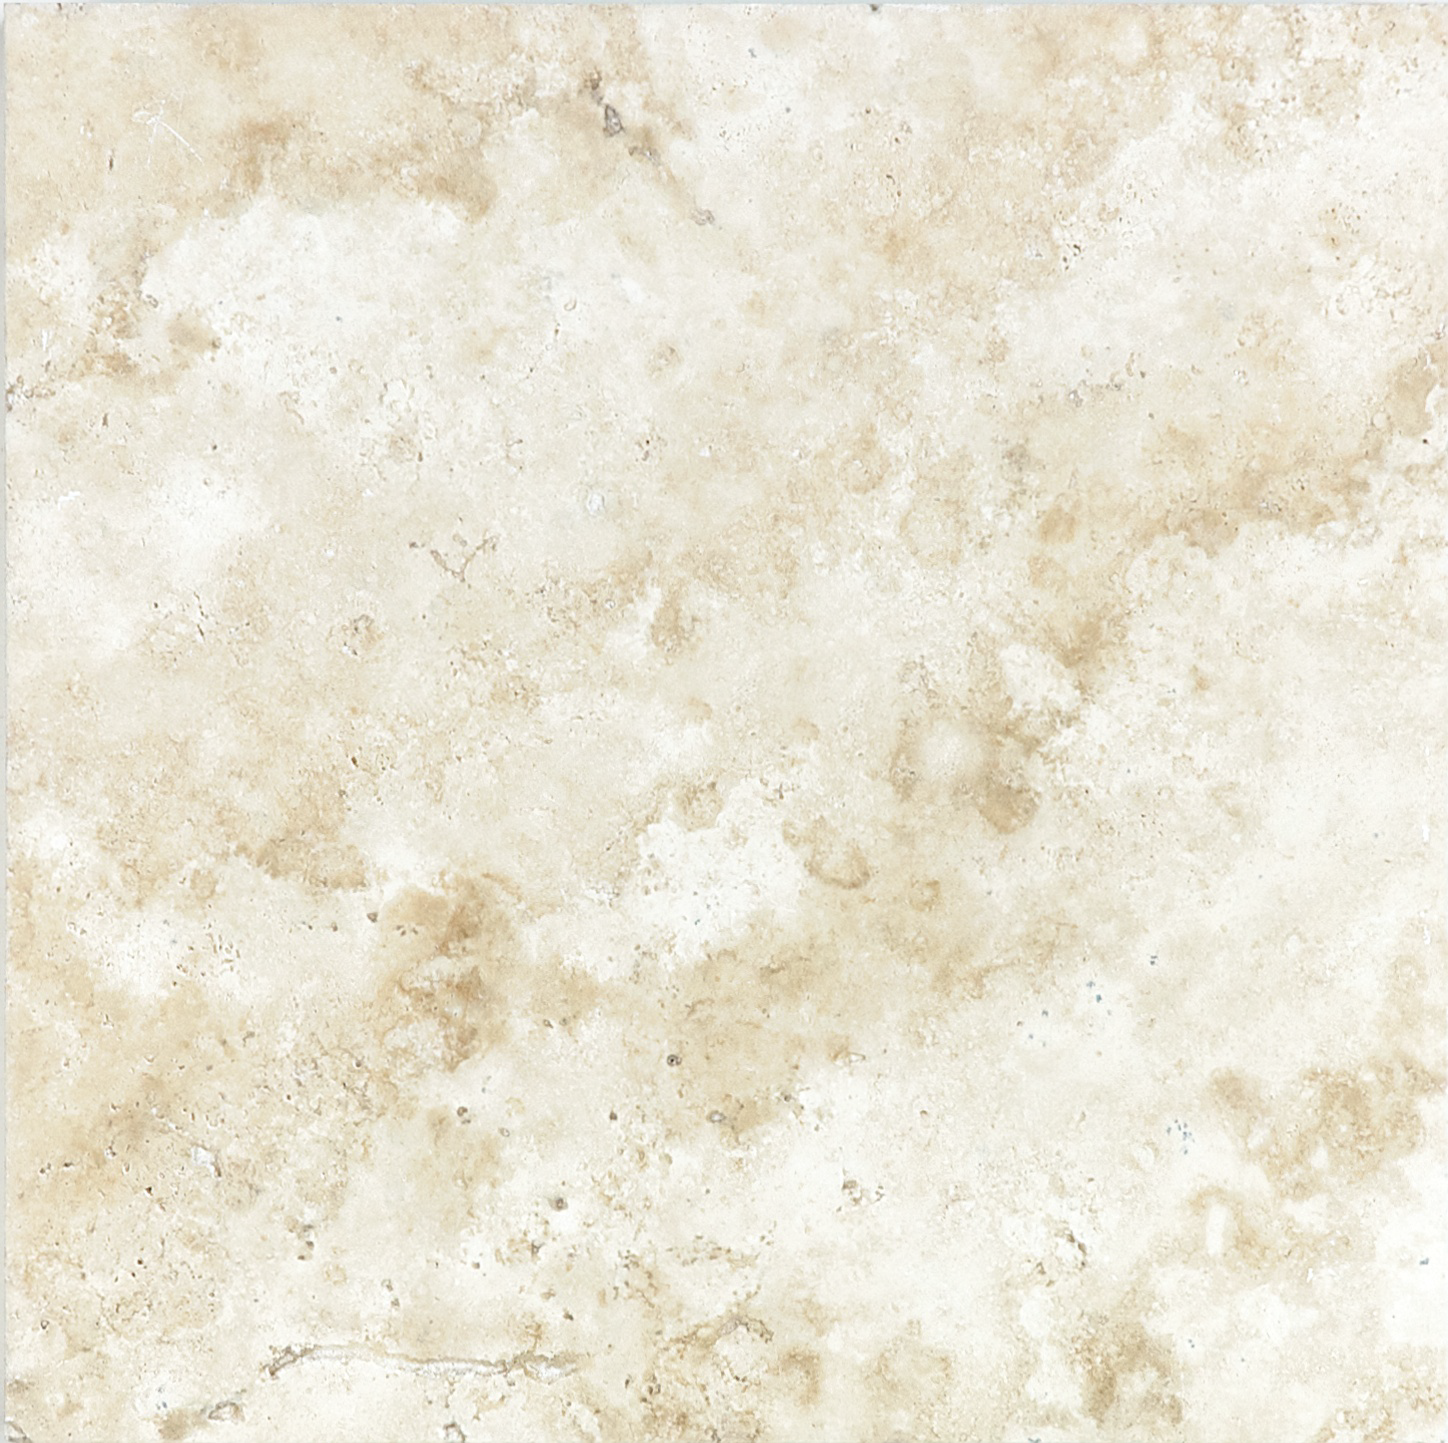 travertine pattern natural stone field tile from ivory anatolia collection distributed by surface group international brushed finish straight edge edge 8x8 square shape